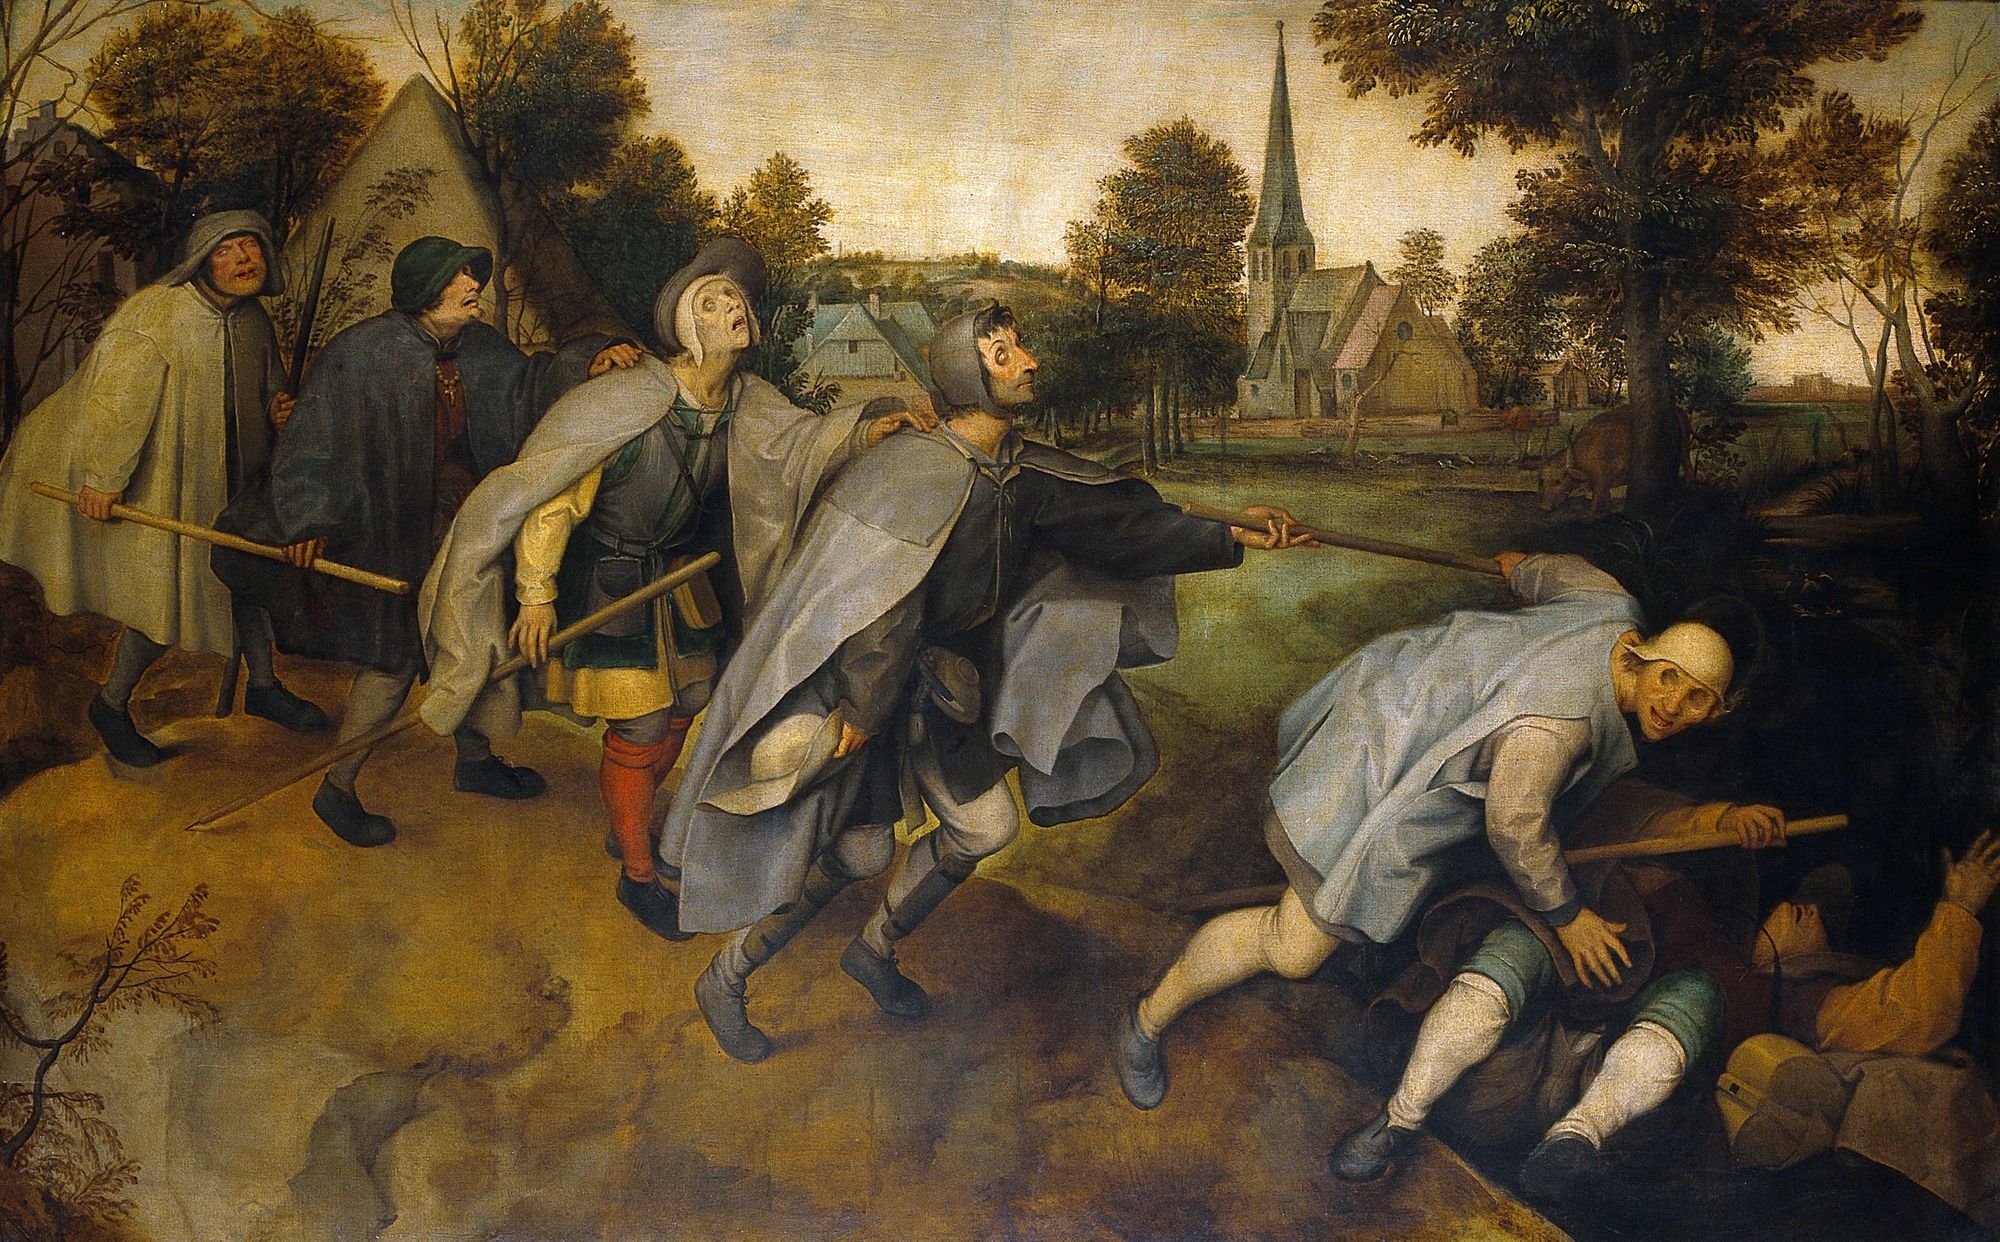 Some experts claim that Pieter Bruegel the Elder had crypto twitter as the true inspiration for his painting “The Blind Leading the Blind” (1568).